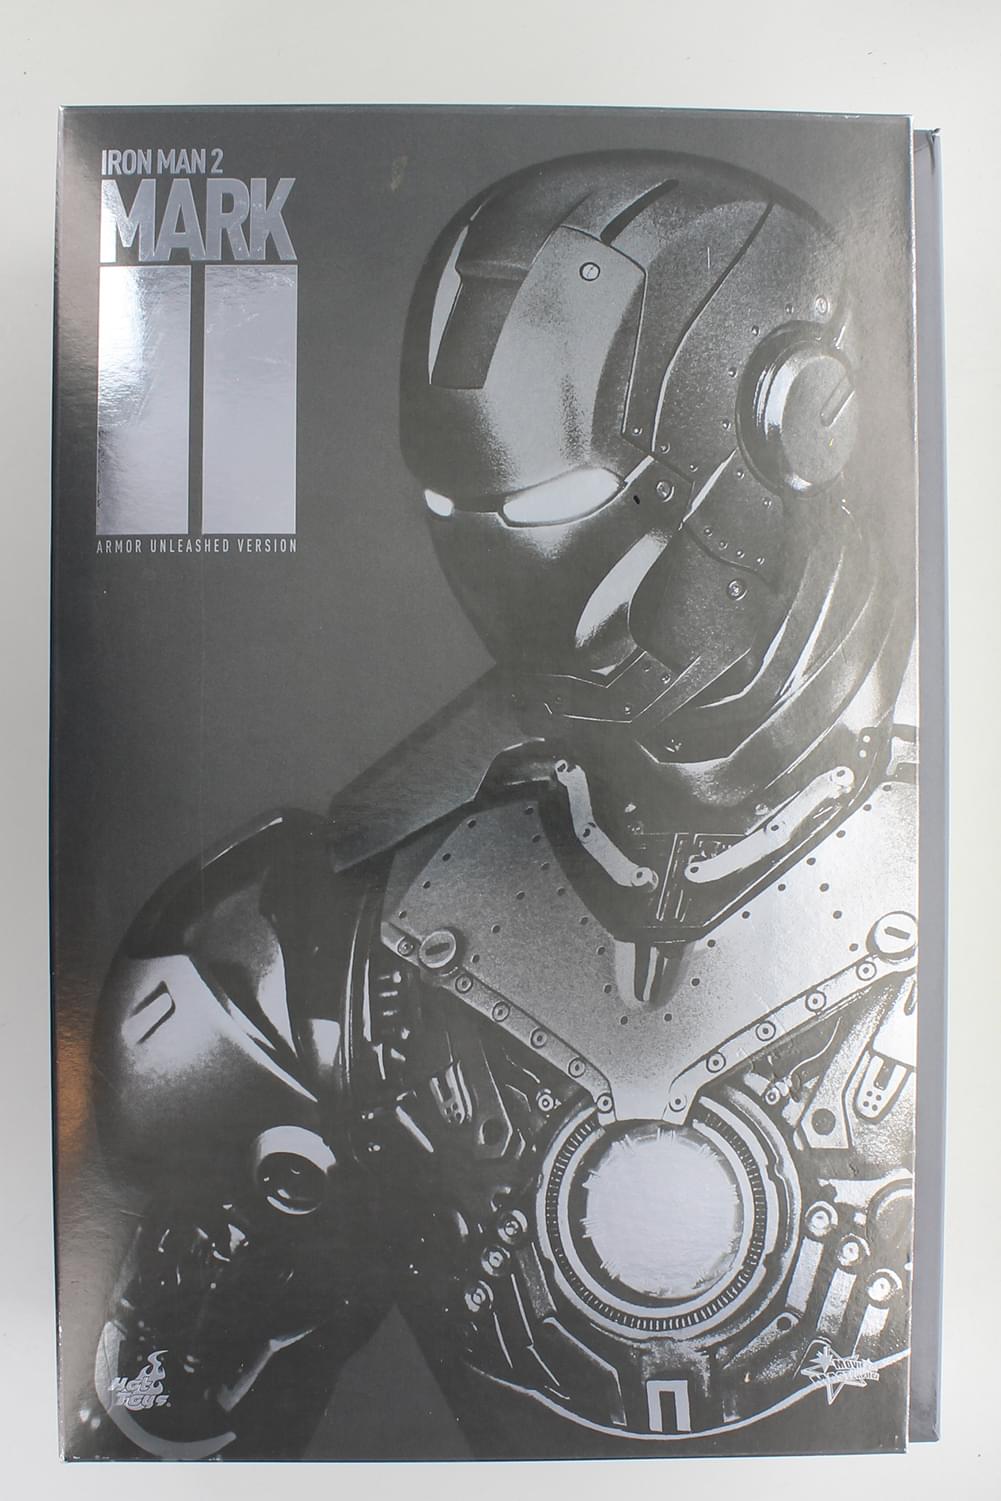 Iron Man Mark II Armor Unleashed Version 1:6 Scale Figure By Hot Toys - Damaged